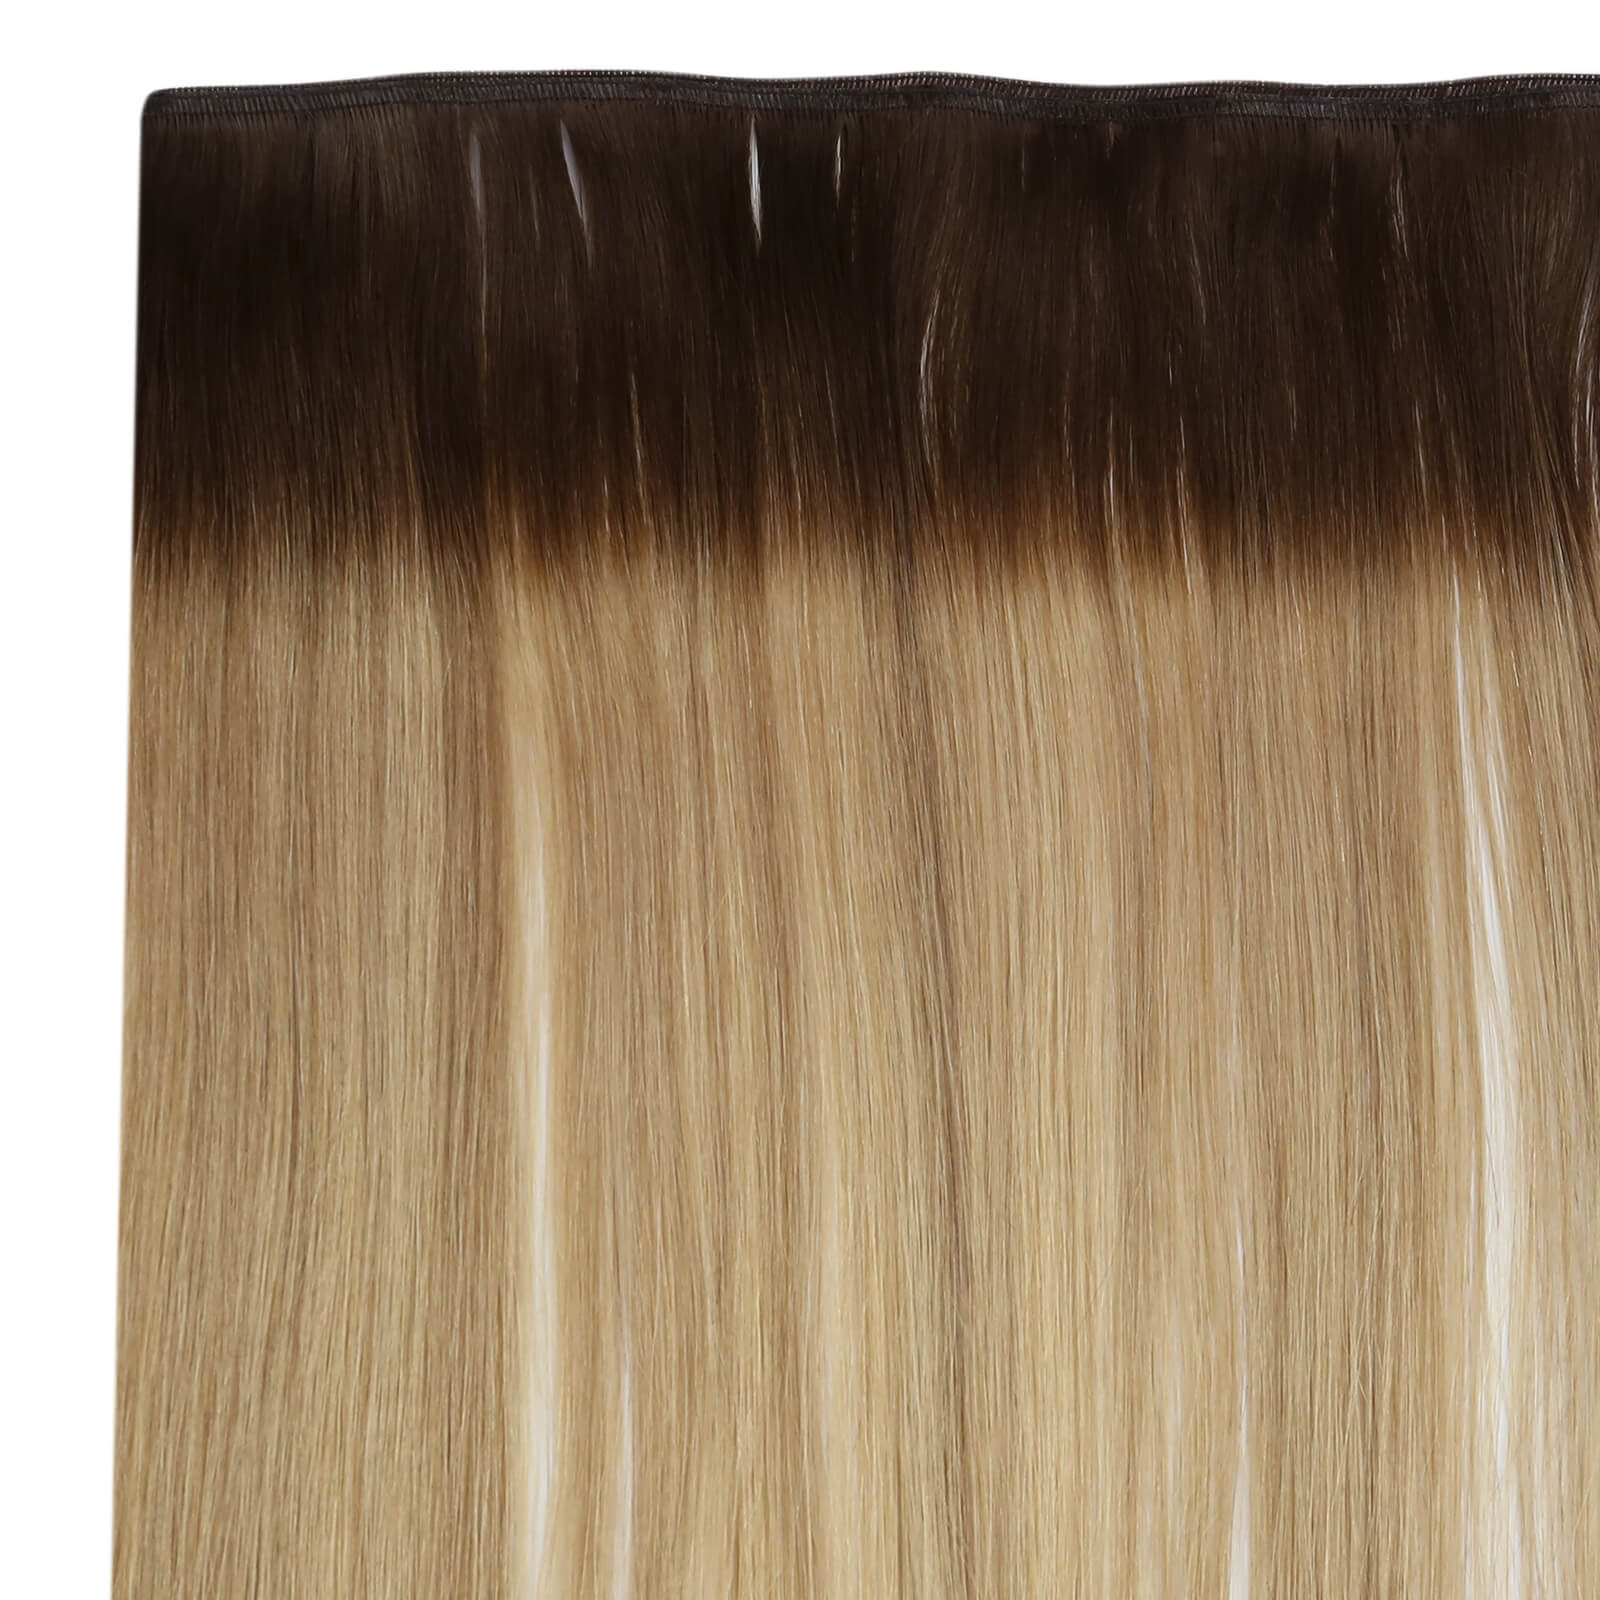 sunny hair weft sew in hair extensions,sunny hair hair weft extensions,hair weft extensions